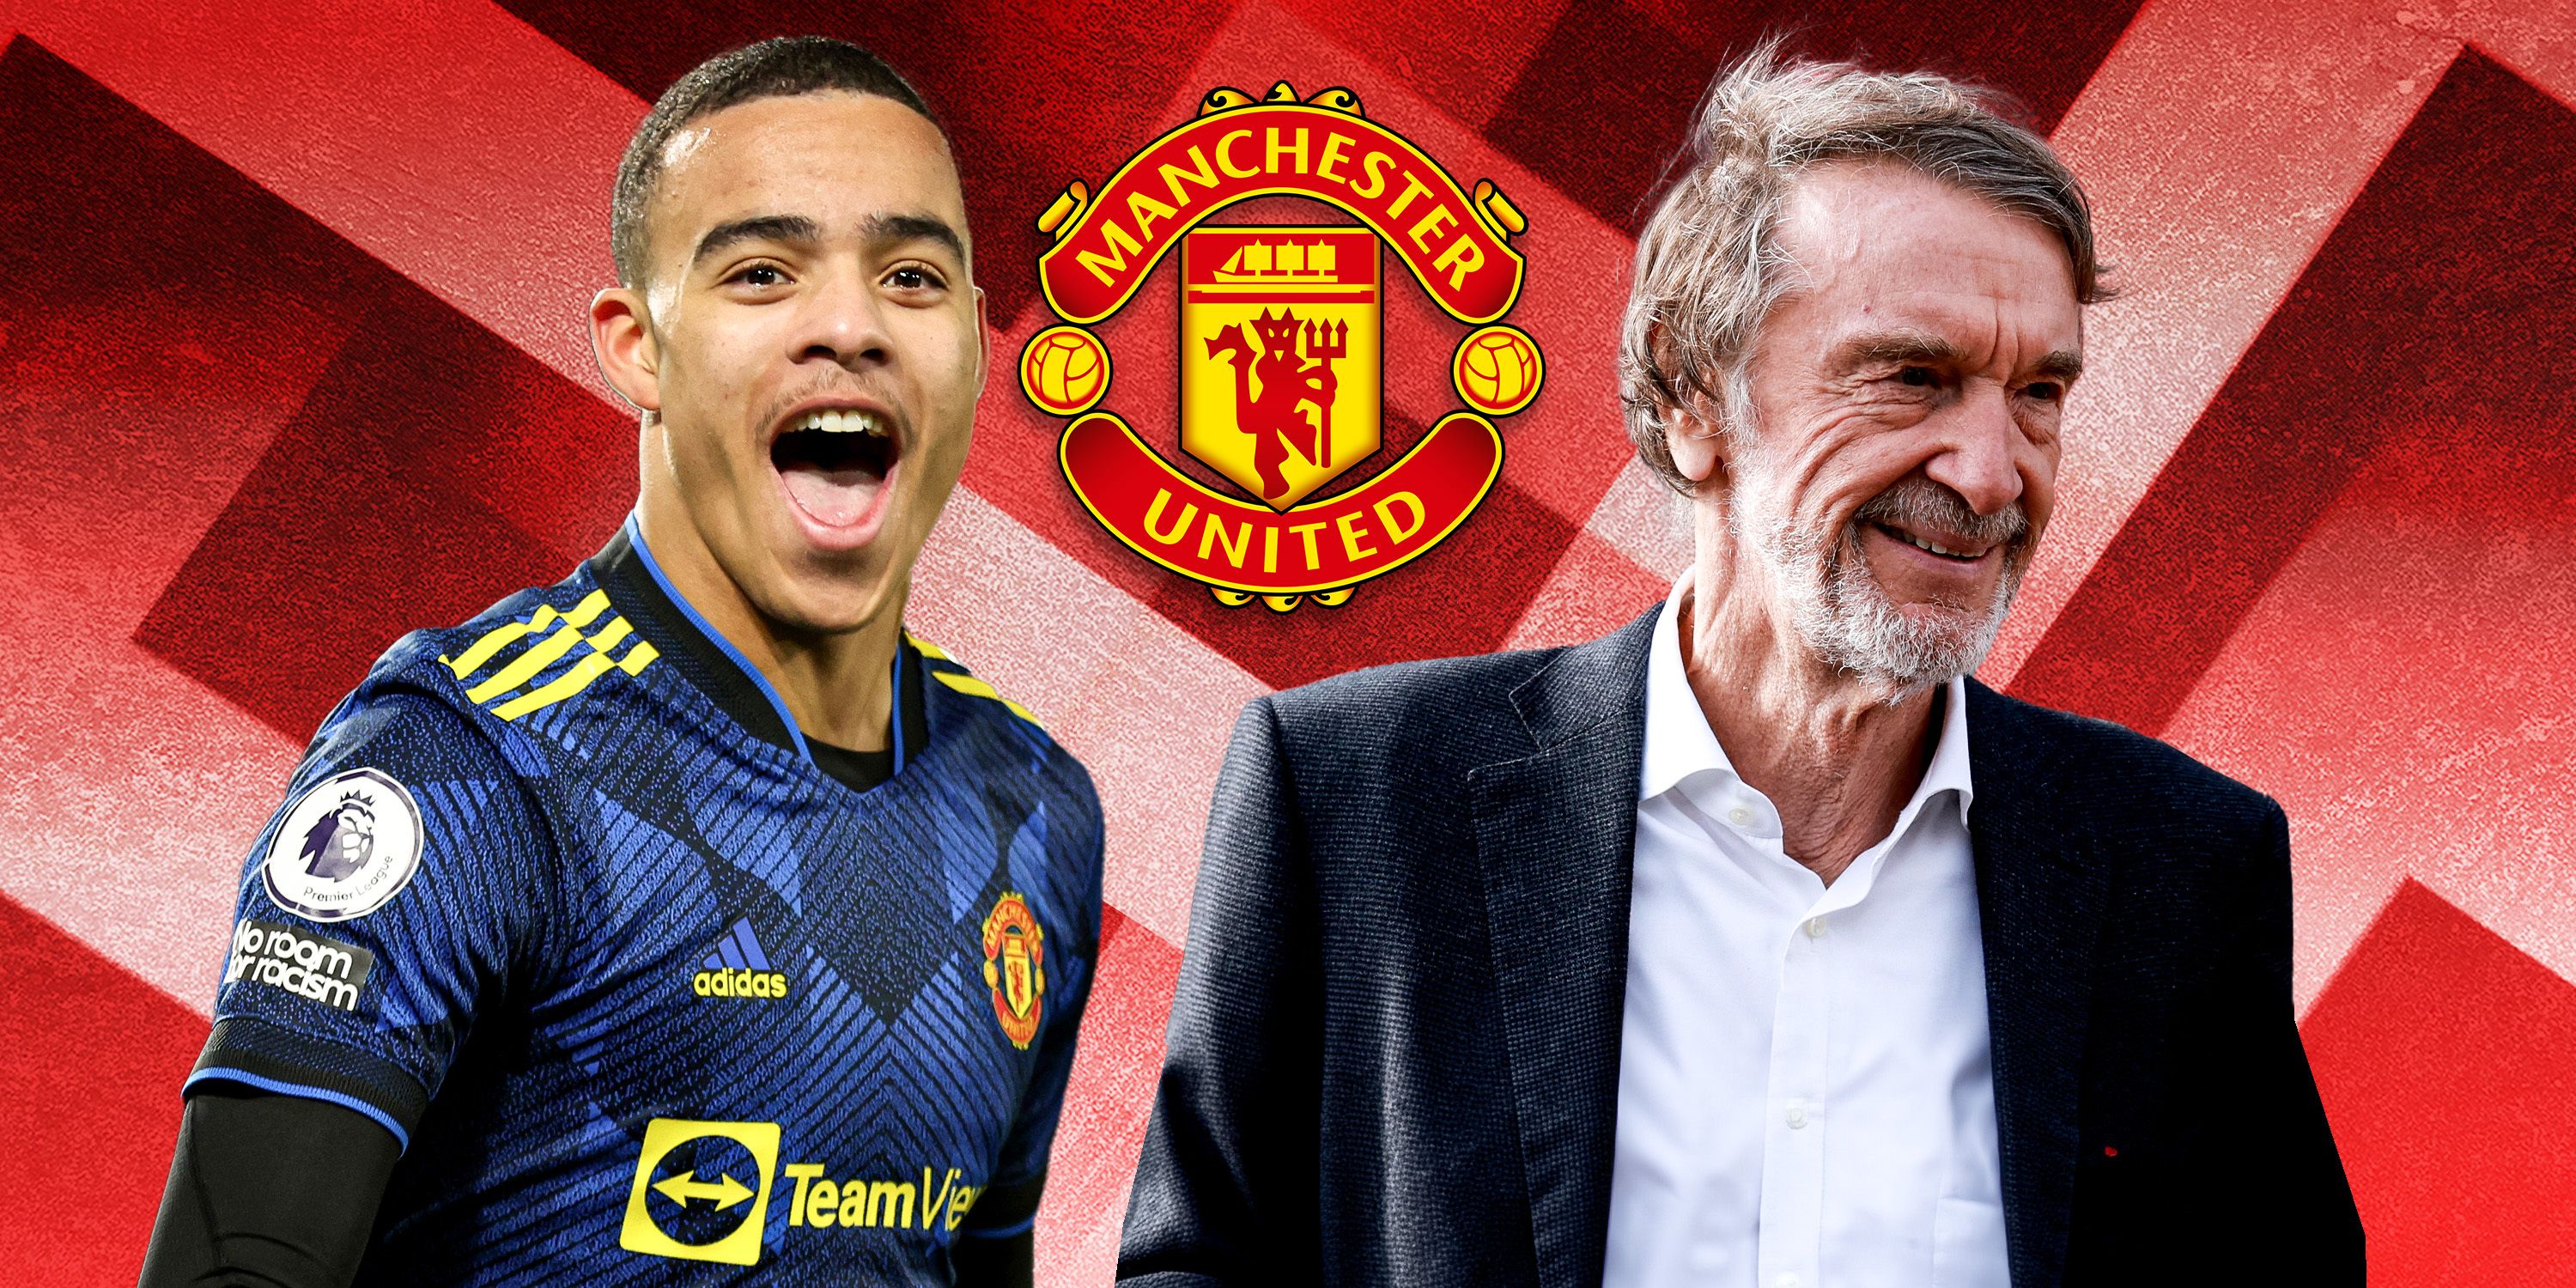 Manchester United winger Mason Greenwood celebrating and co-owner Sir Jim Ratcliffe